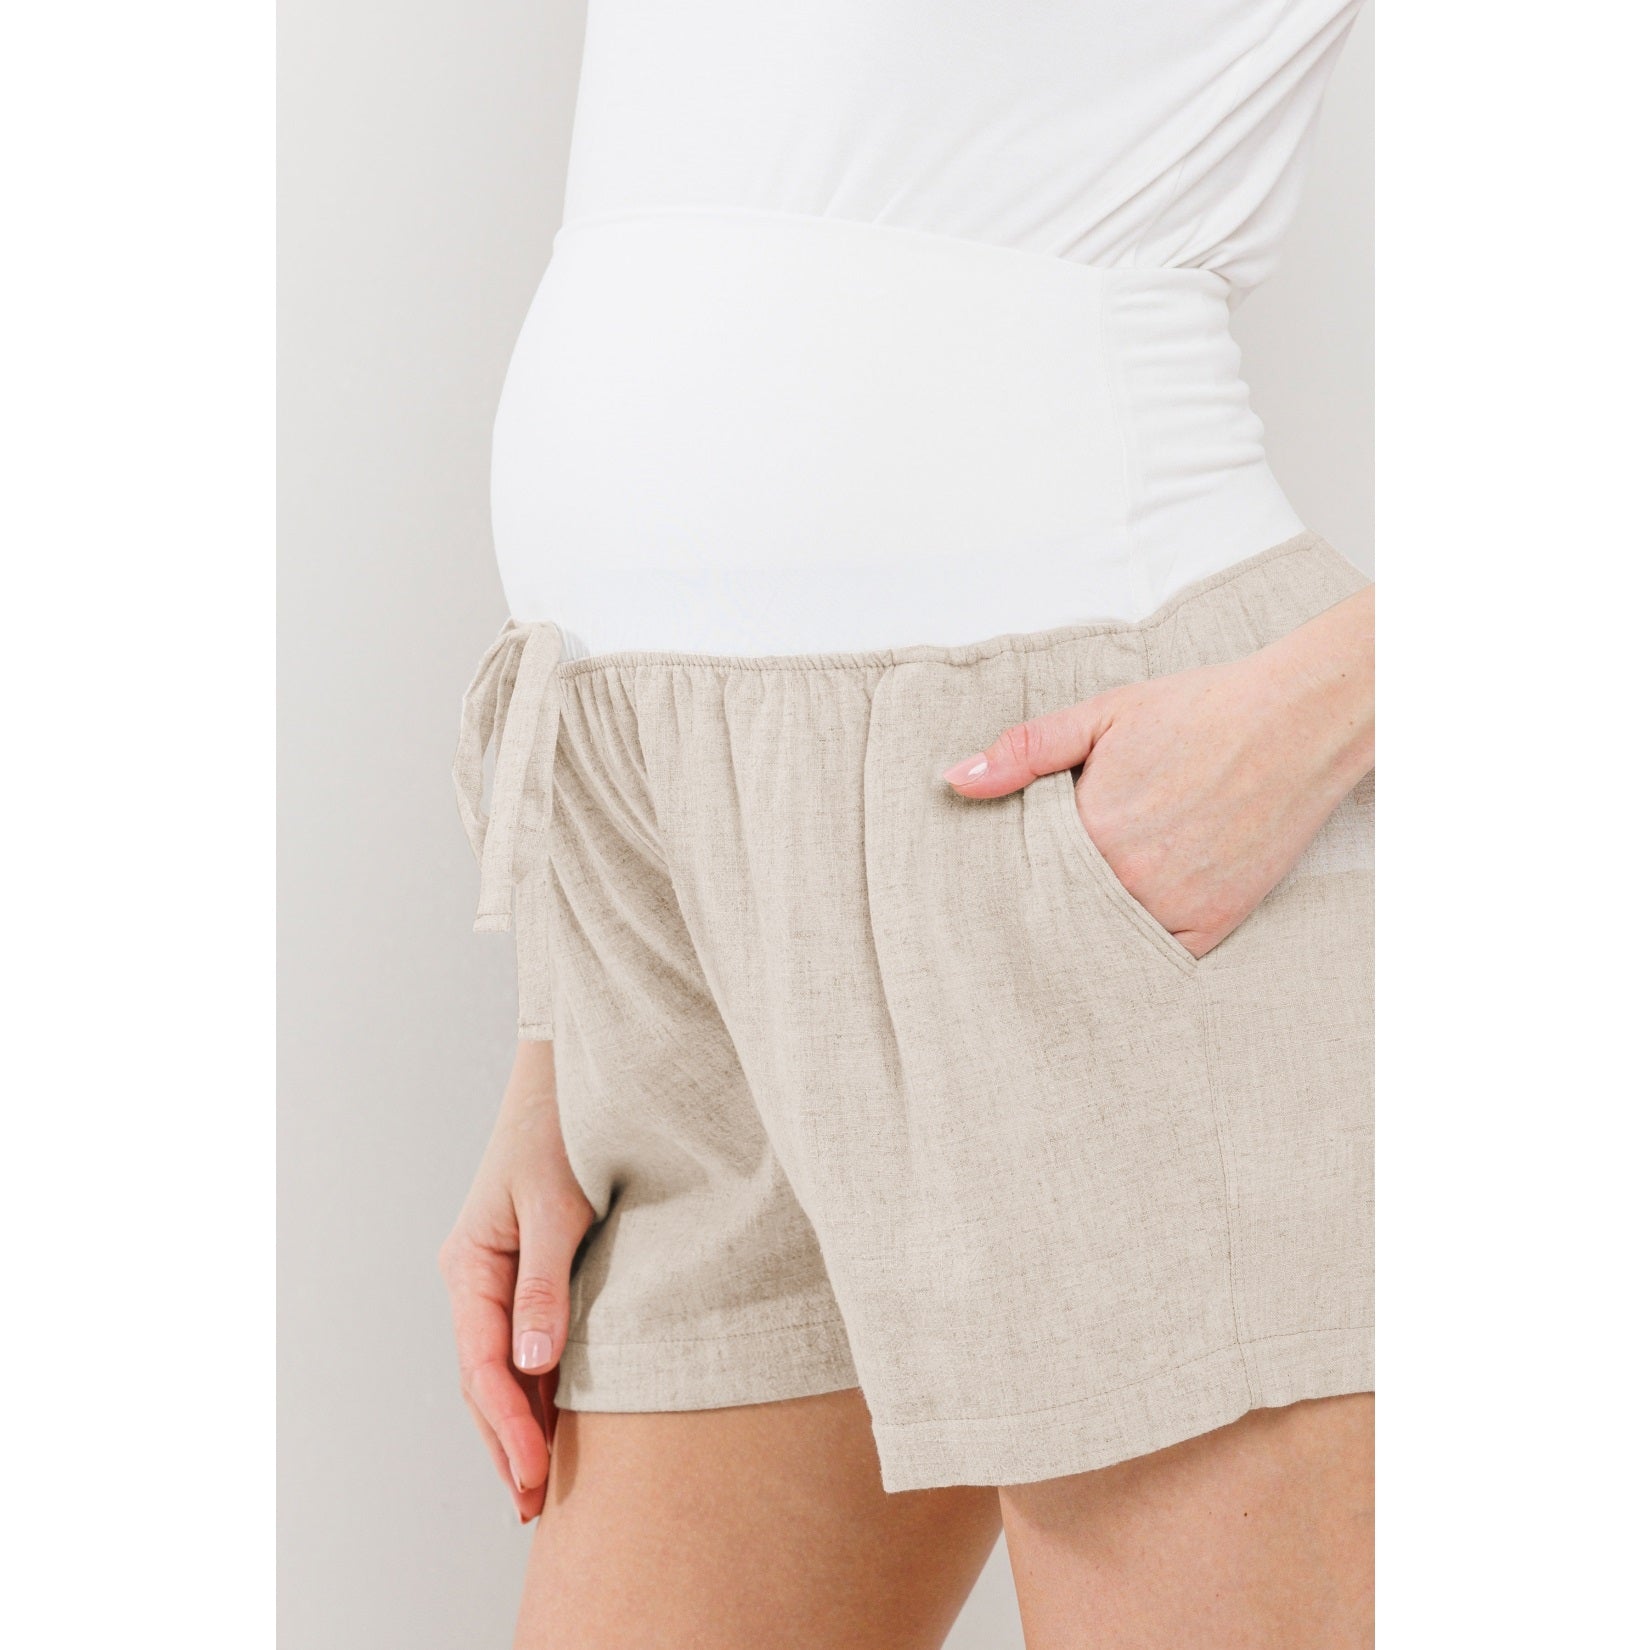 Solid Maternity Shorts with Pockets and Drawstring